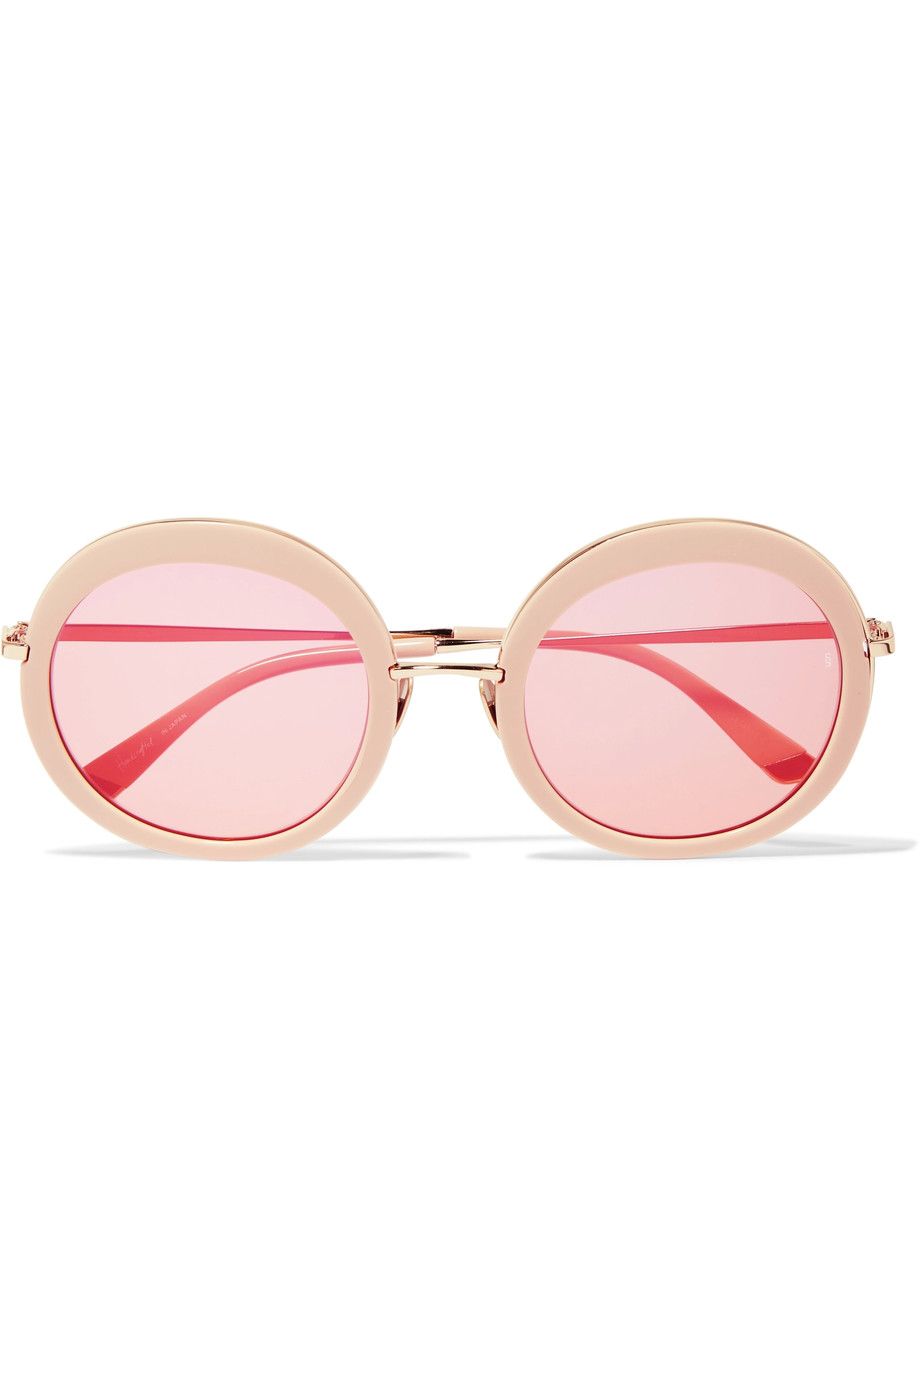 Eyewear, Sunglasses, Glasses, Pink, Personal protective equipment, Vision care, Goggles, aviator sunglass, Peach, Transparent material, 